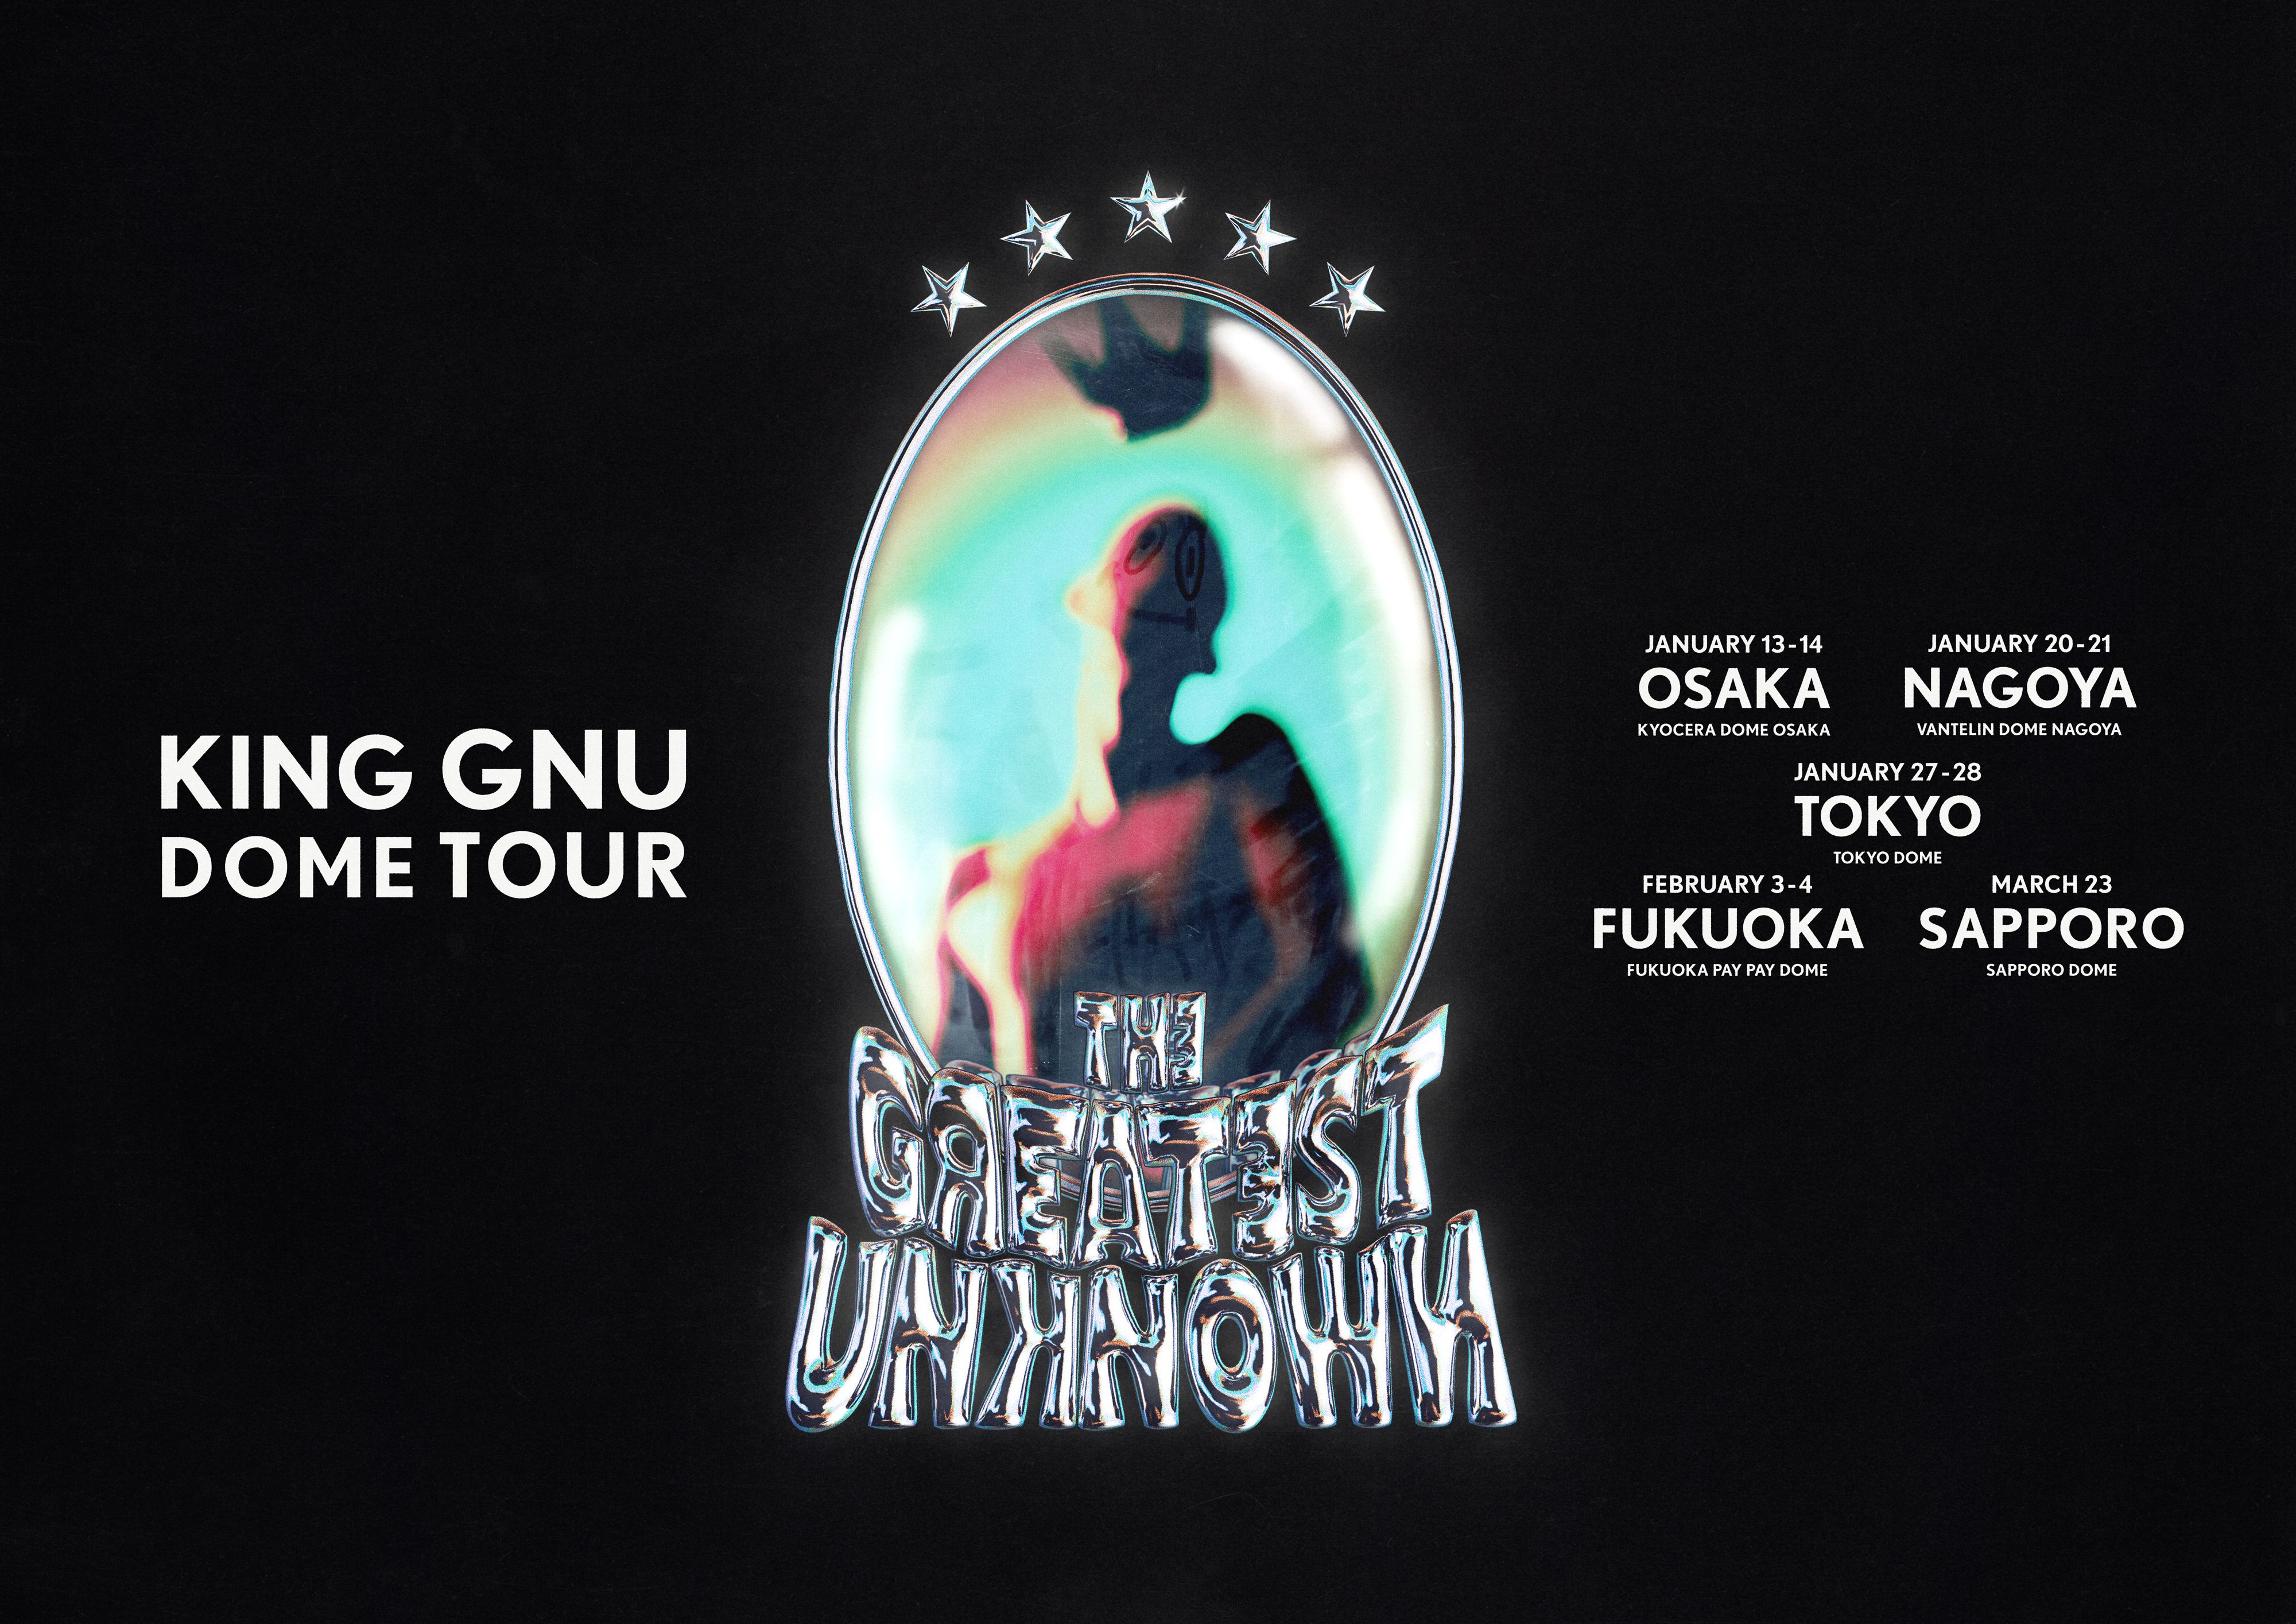 King Gnu Dome Tour 「THE GREATEST UNKNOWN」 1月27日（土）・28（日